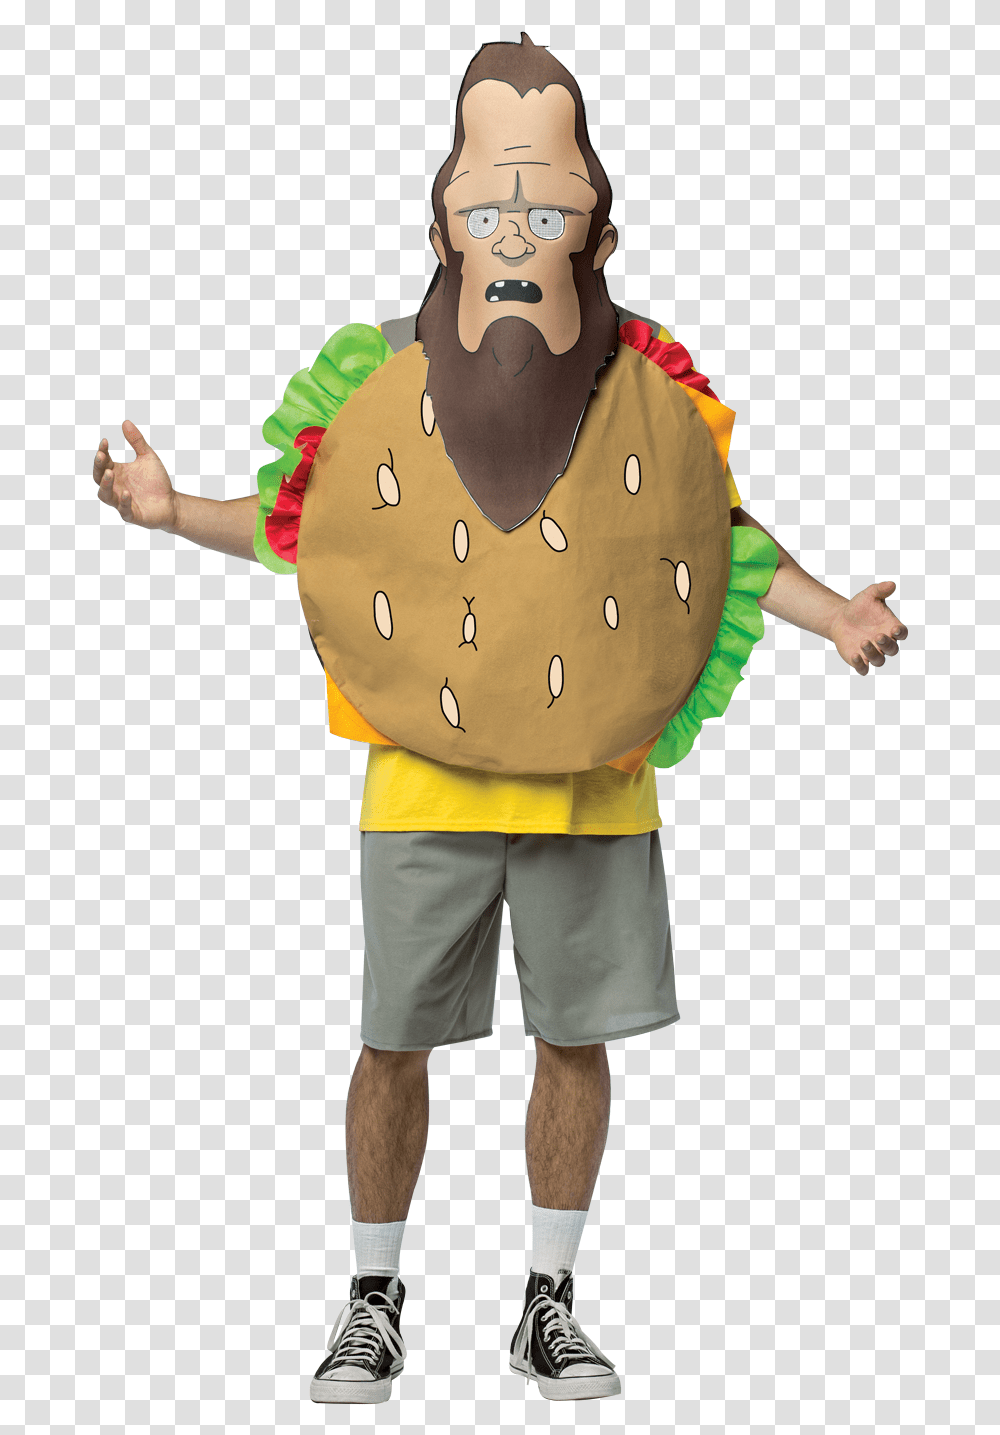 Official Licensed Bobs Burgers Beefsquatch Costume Bob's Burgers Beefsquatch Costume, Person, Human, Apparel Transparent Png